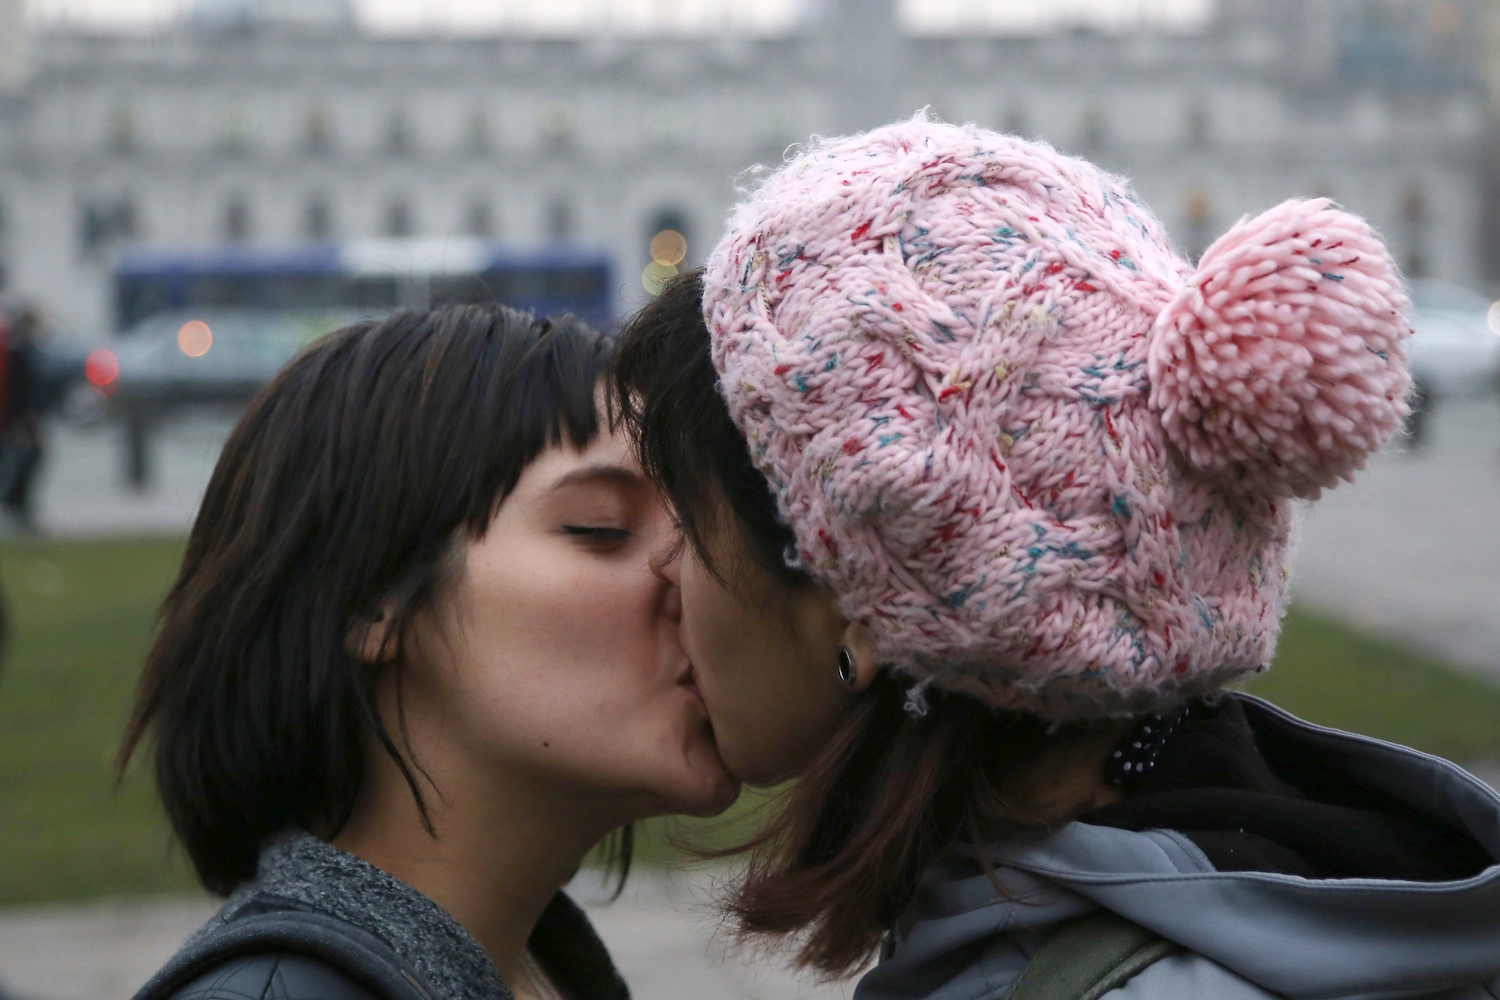 Quarter Of Straight Women Have Had Lesbian Sex While Half